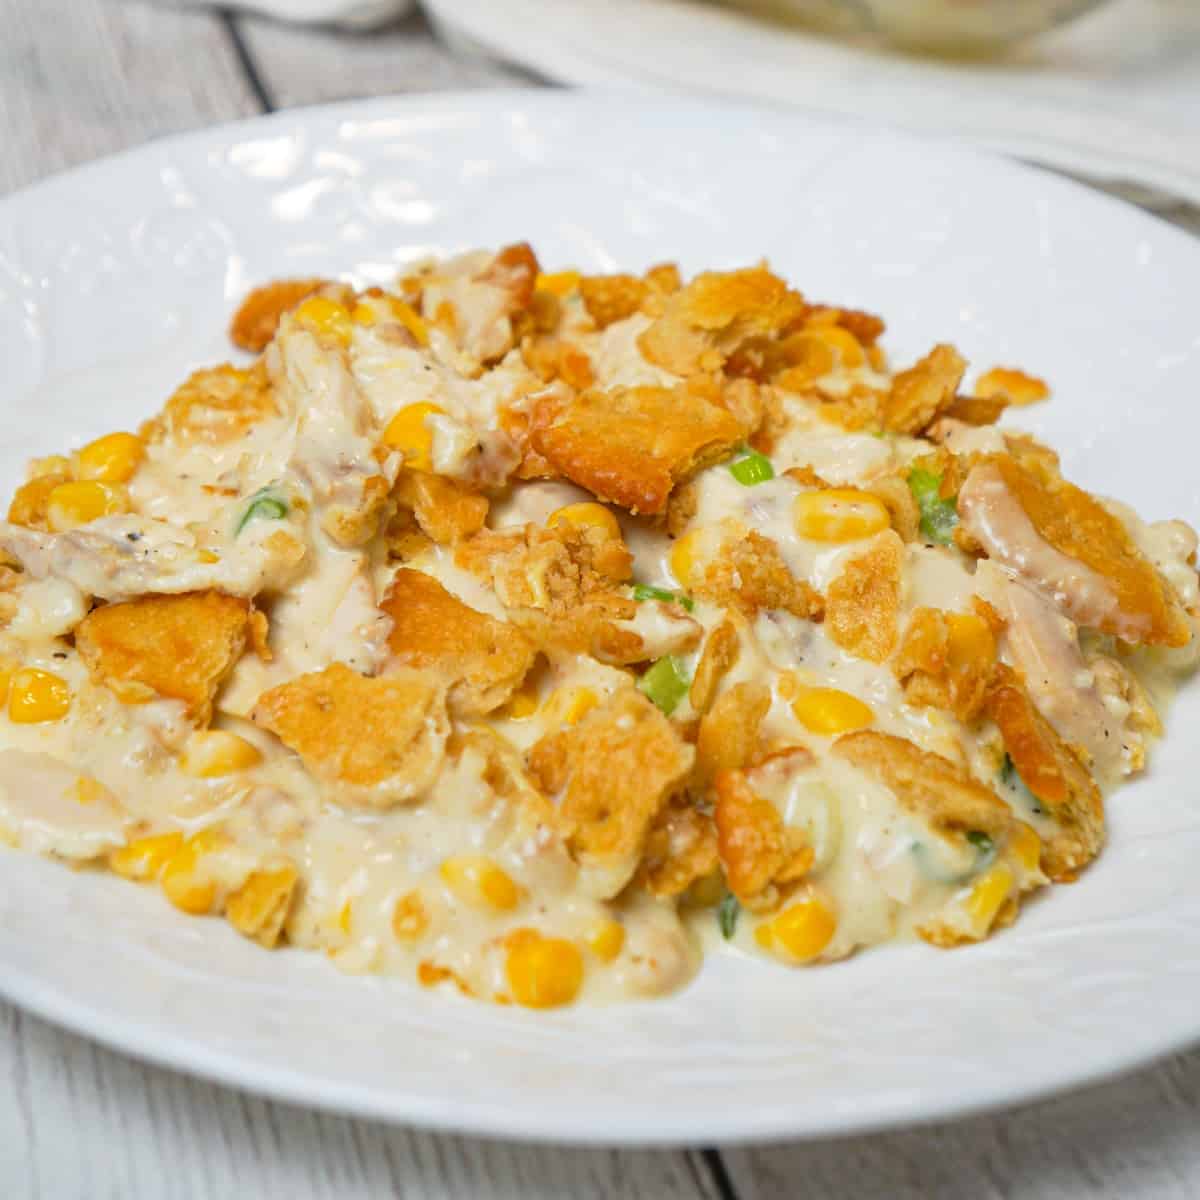 Ritz Chicken Casserole is an easy weeknight dinner recipe using shredded rotisserie chicken, tossed in sour cream and cream of chicken soup and topped with crumbled Ritz crumbs.